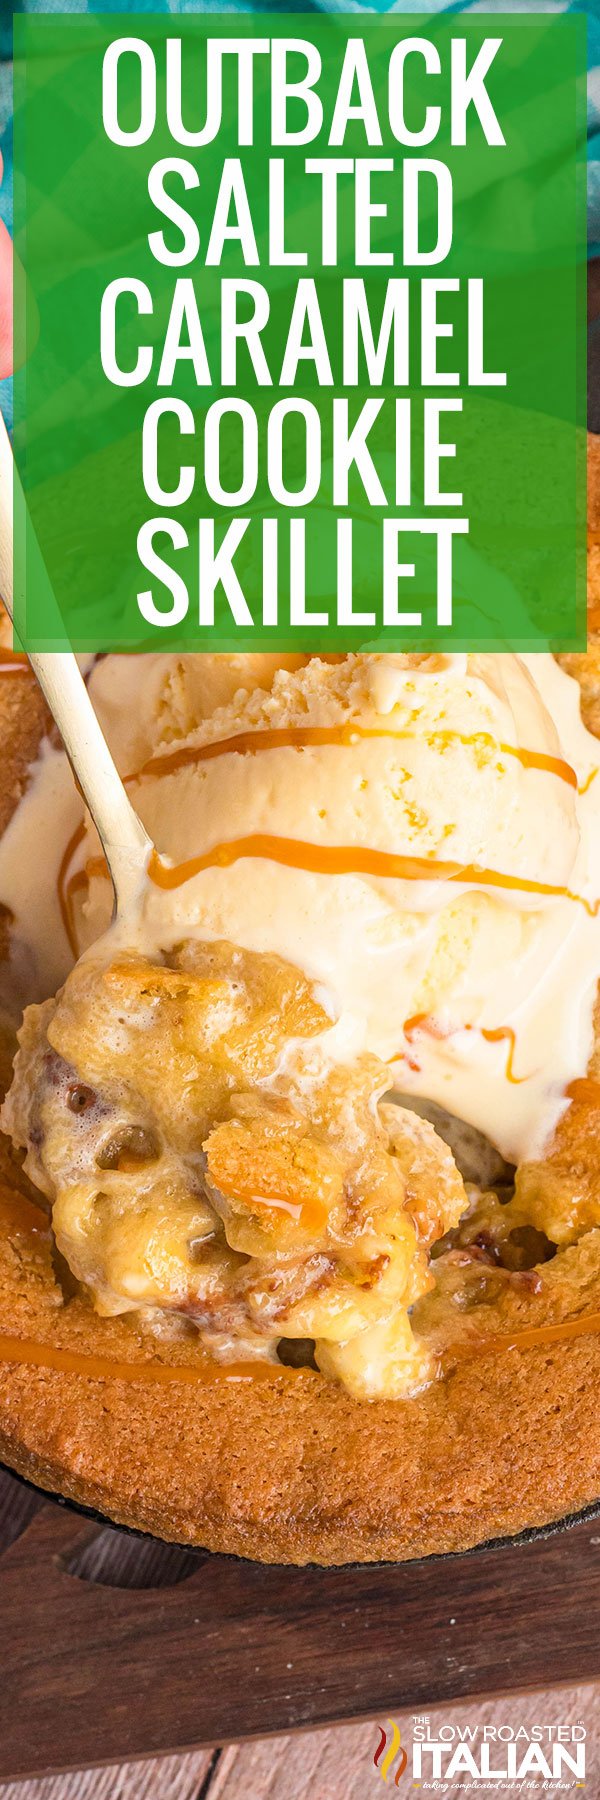 Outback Salted Caramel Cookie Skillet - PIN